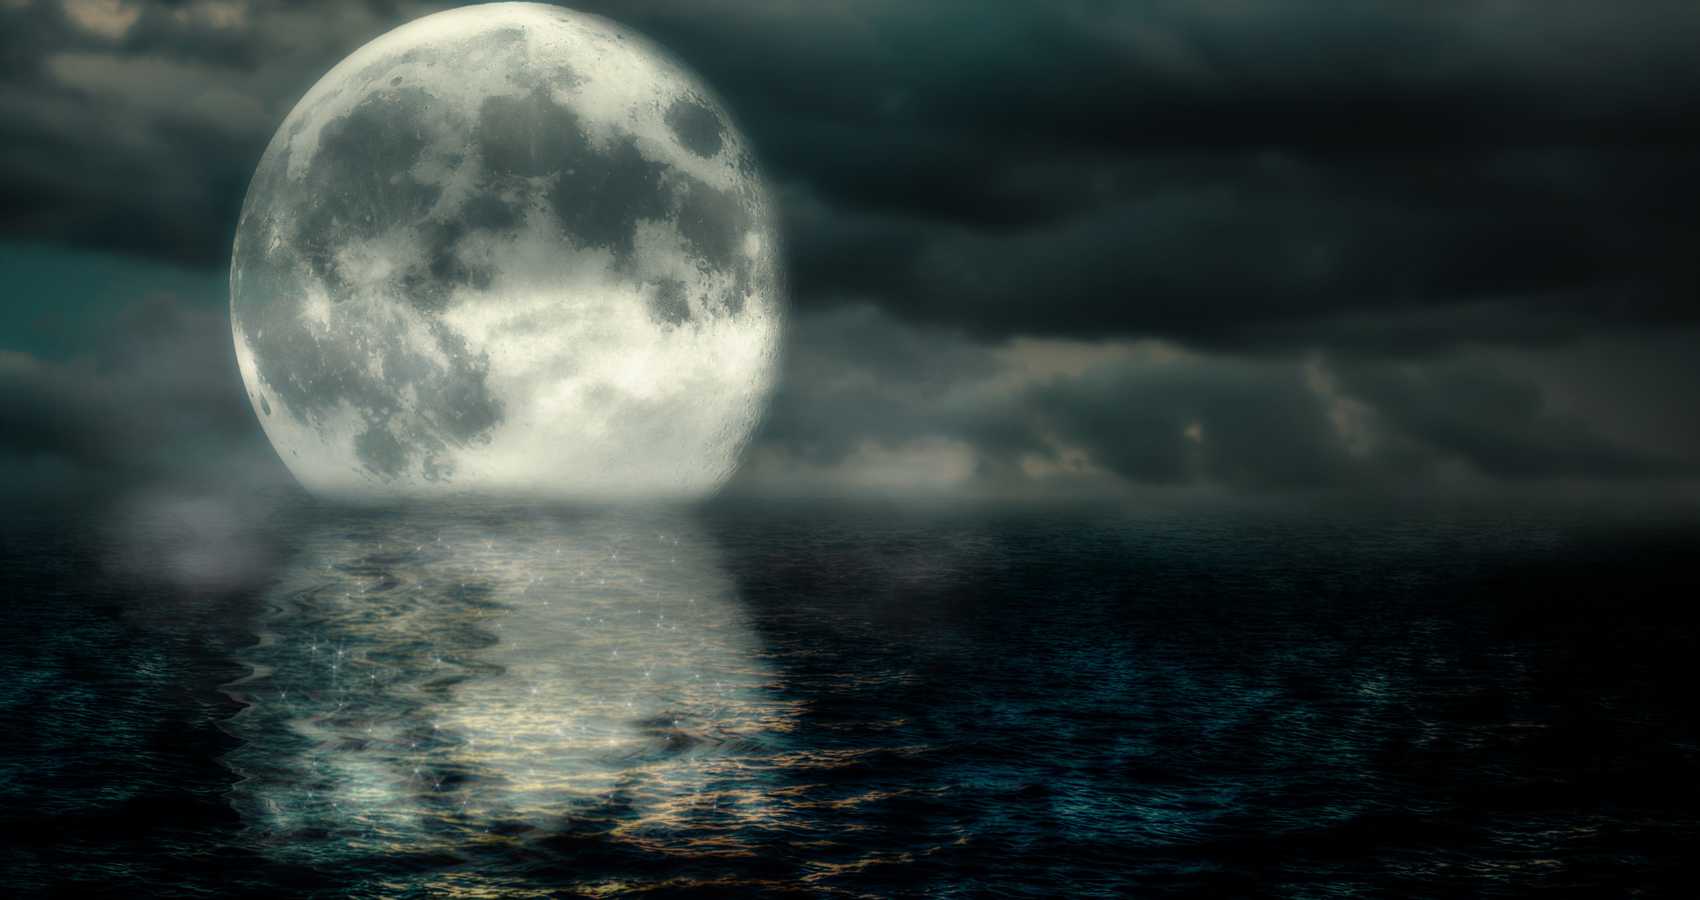 The Full Moon, poetry by Hanh Chau at Spillwords.com